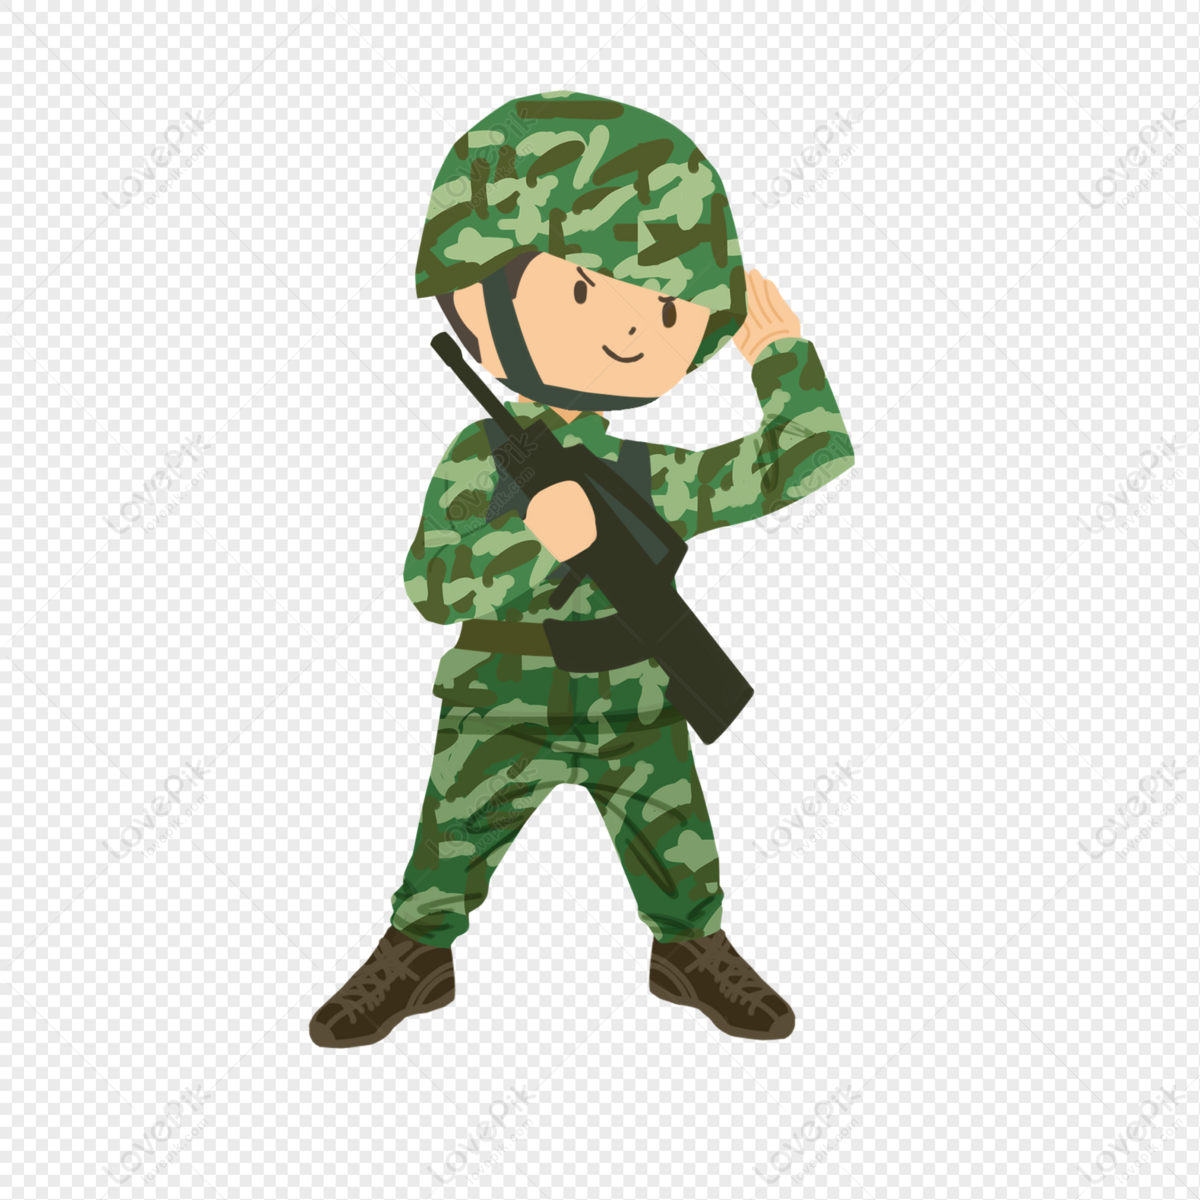 Cartoon Army Day Marines PNG Transparent Background And Clipart Image For  Free Download - Lovepik | 401515990